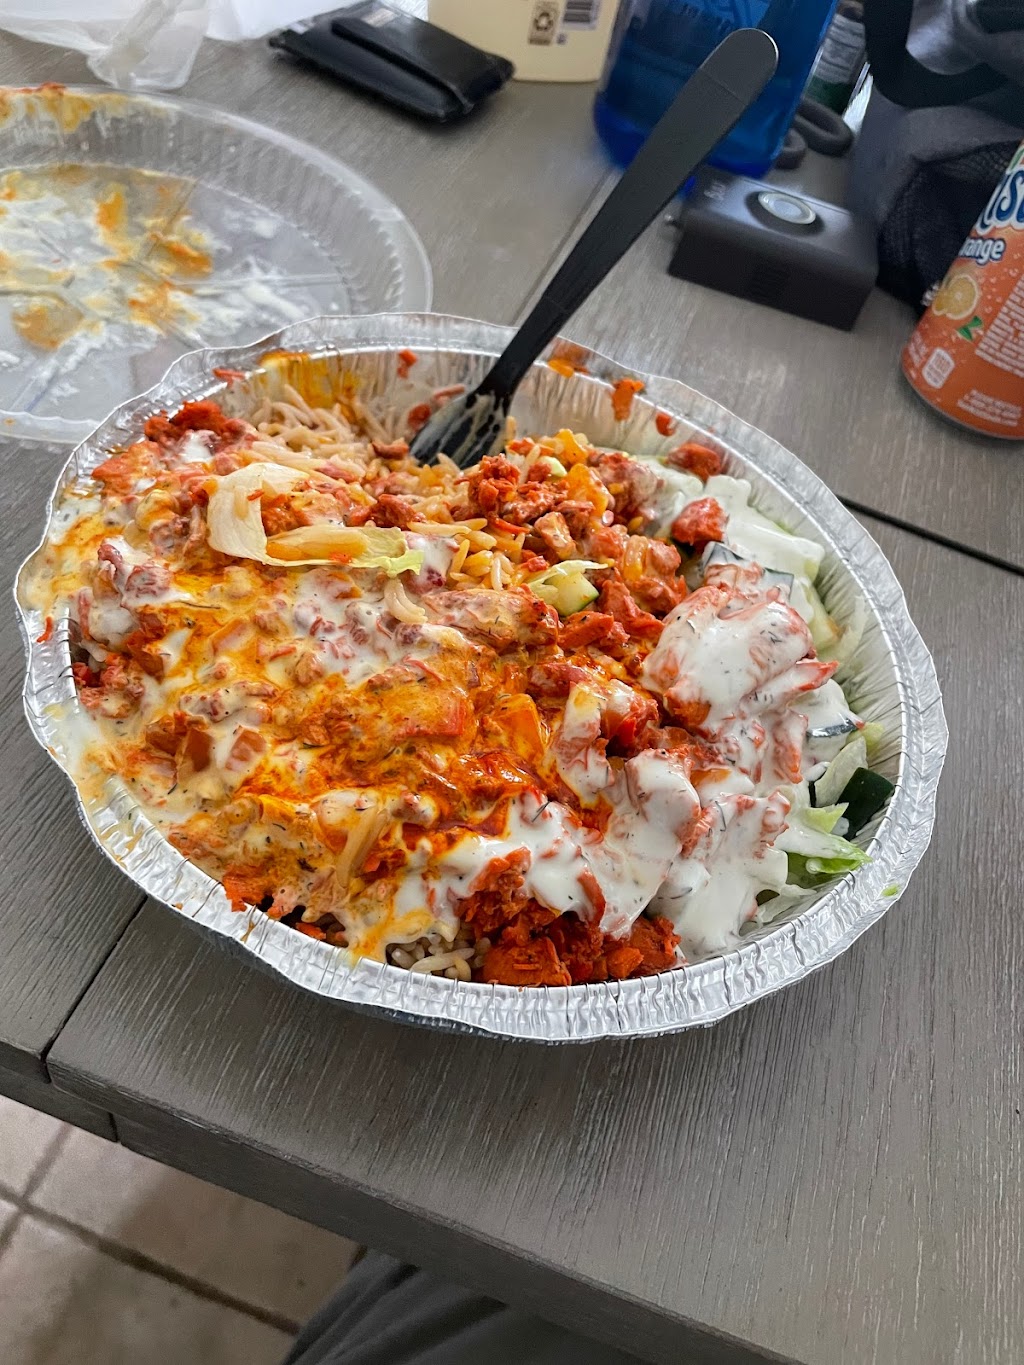 Island Halal Food | 884 Middle Country Rd, Middle Island, NY 11953 | Phone: (631) 448-8548